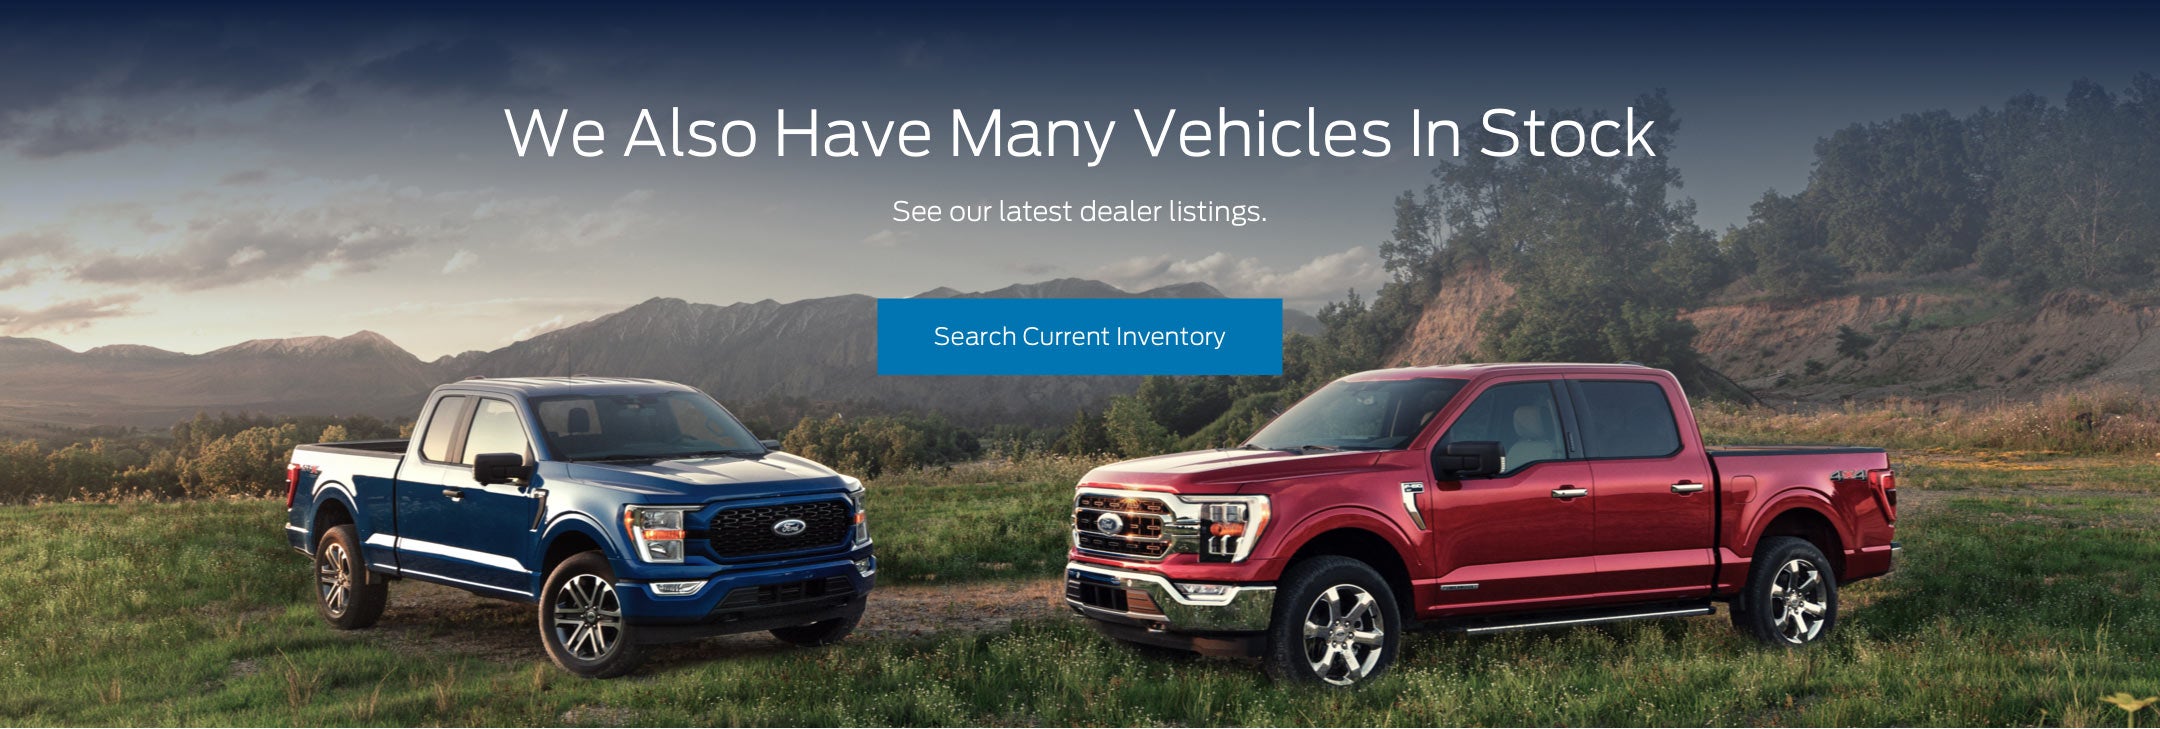 Ford vehicles in stock | Zook Motors in Kane PA